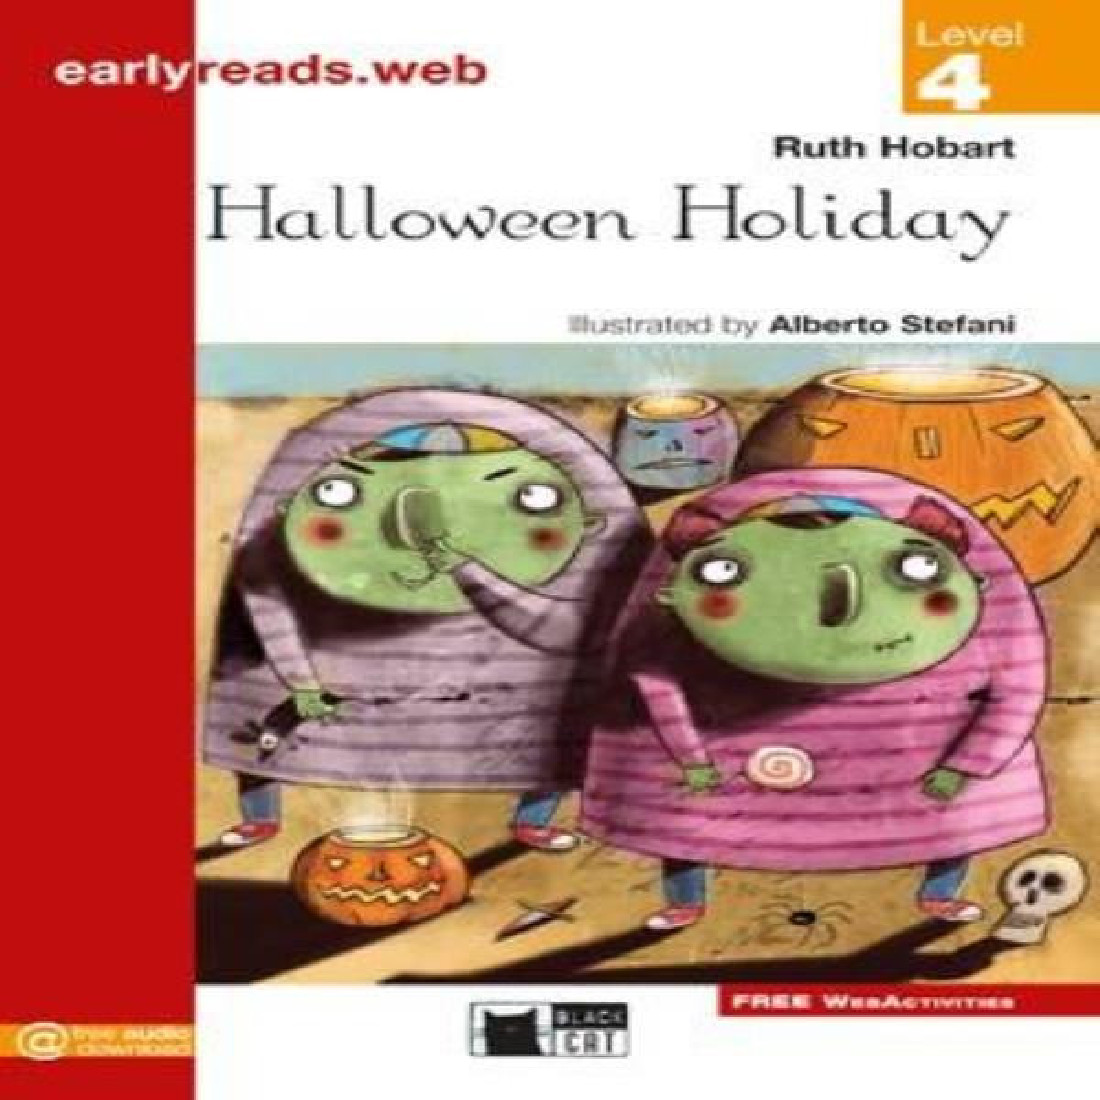 HALLOWEEN HOLIDAY LEV.4 EARLYREADS